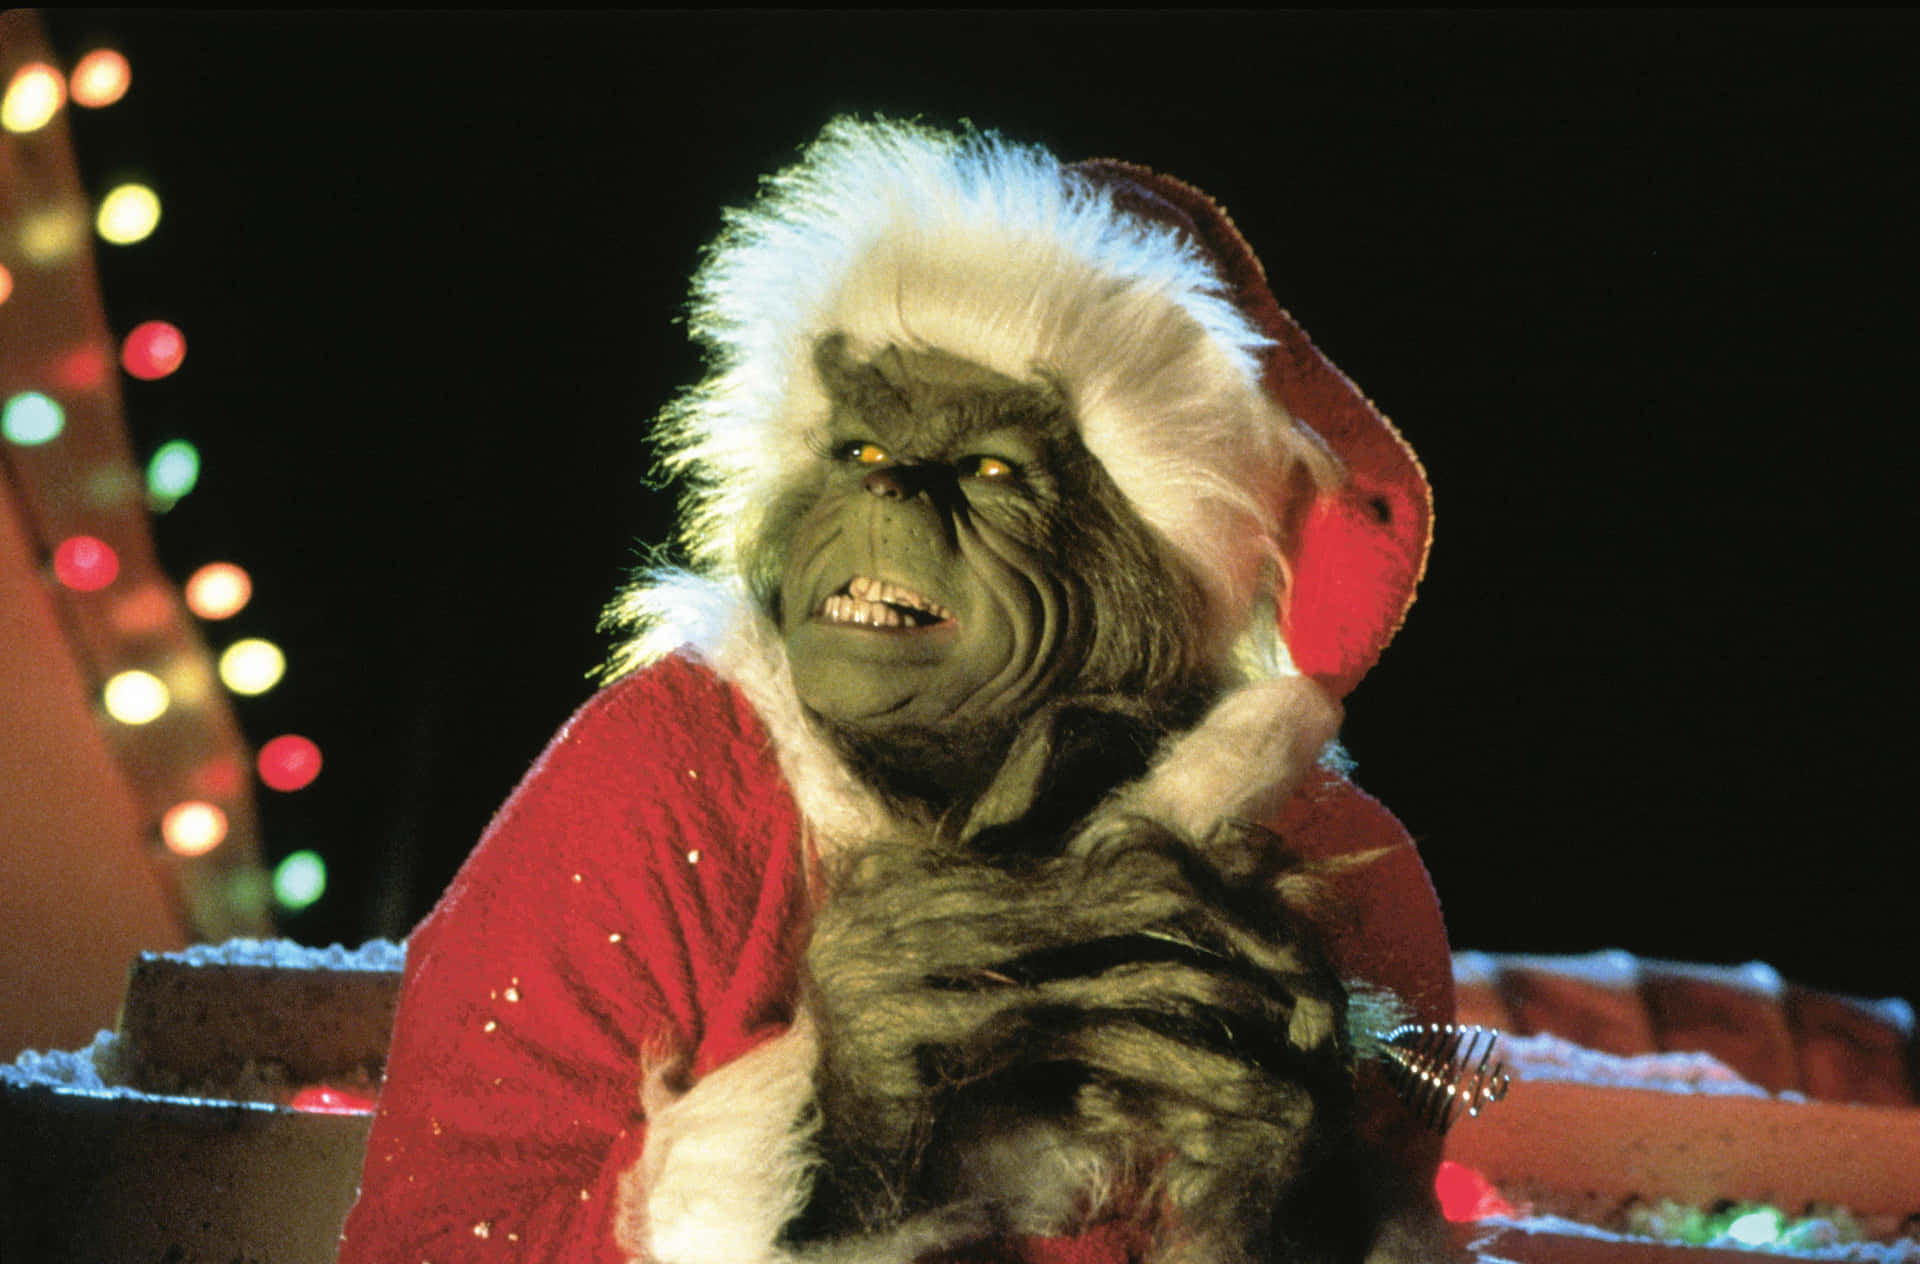 The Grinch Pictures